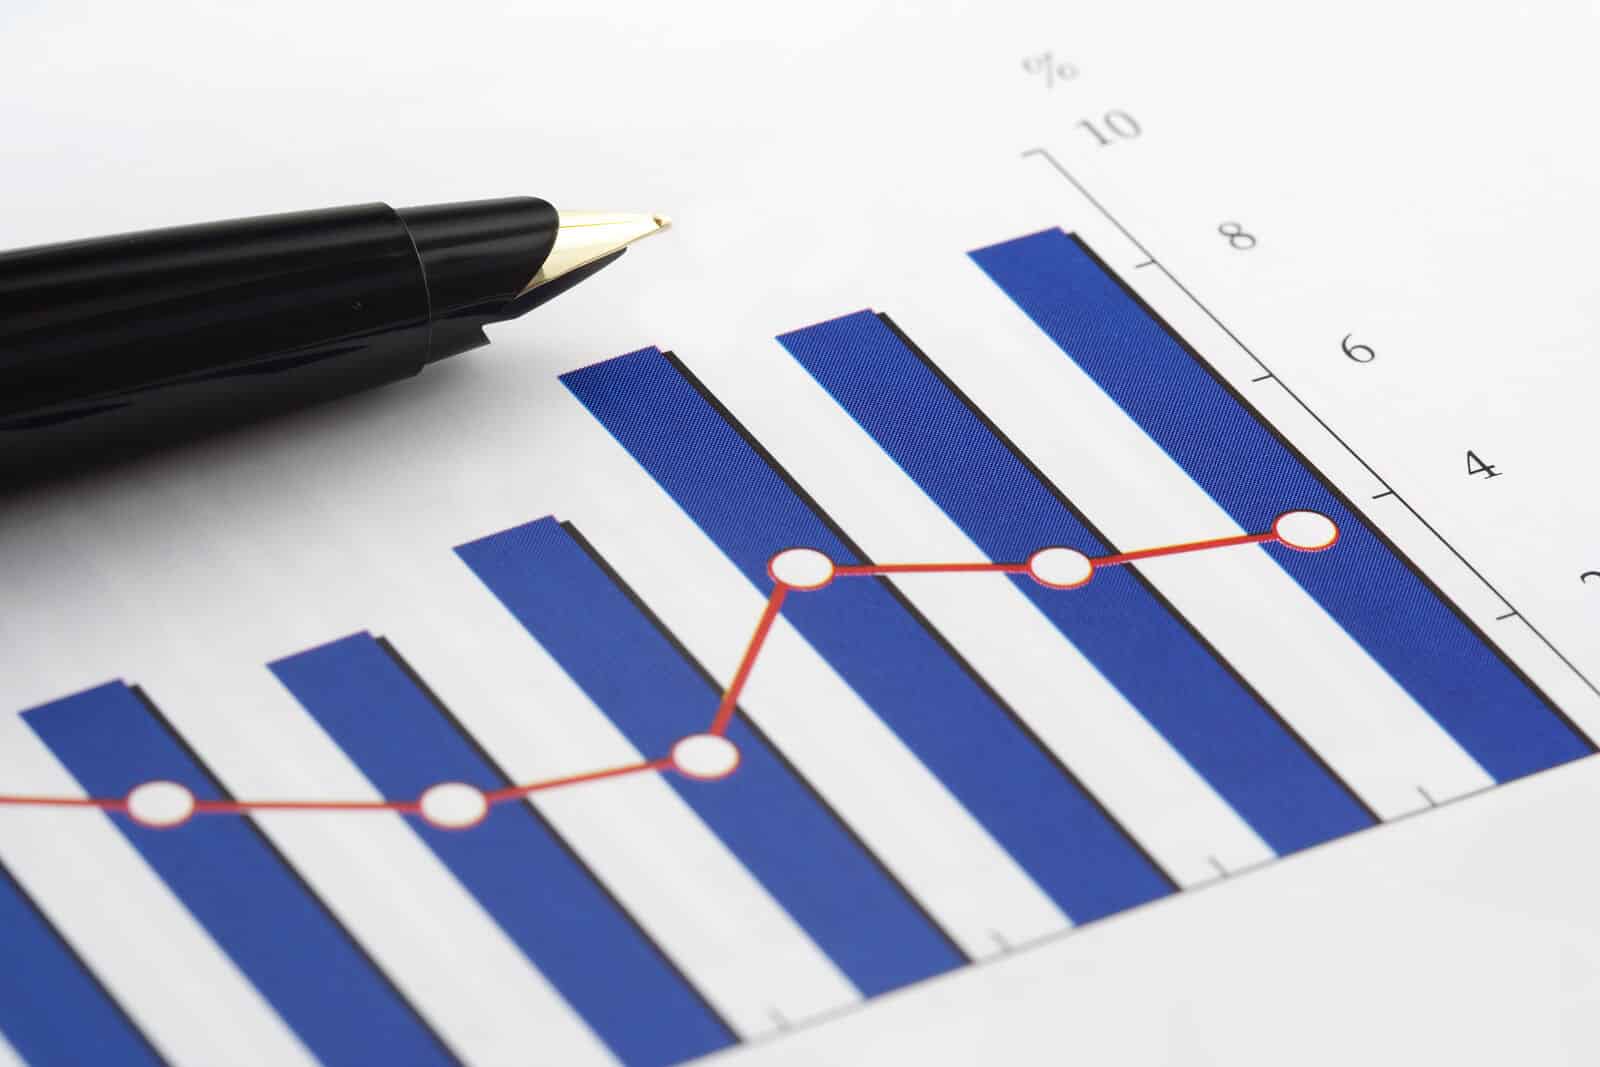 A hand with a pen going over a bar graph. Want to learn more about SEO in healthcare? We can assist your practice in understanding SEO strategy in the healthcare industry.